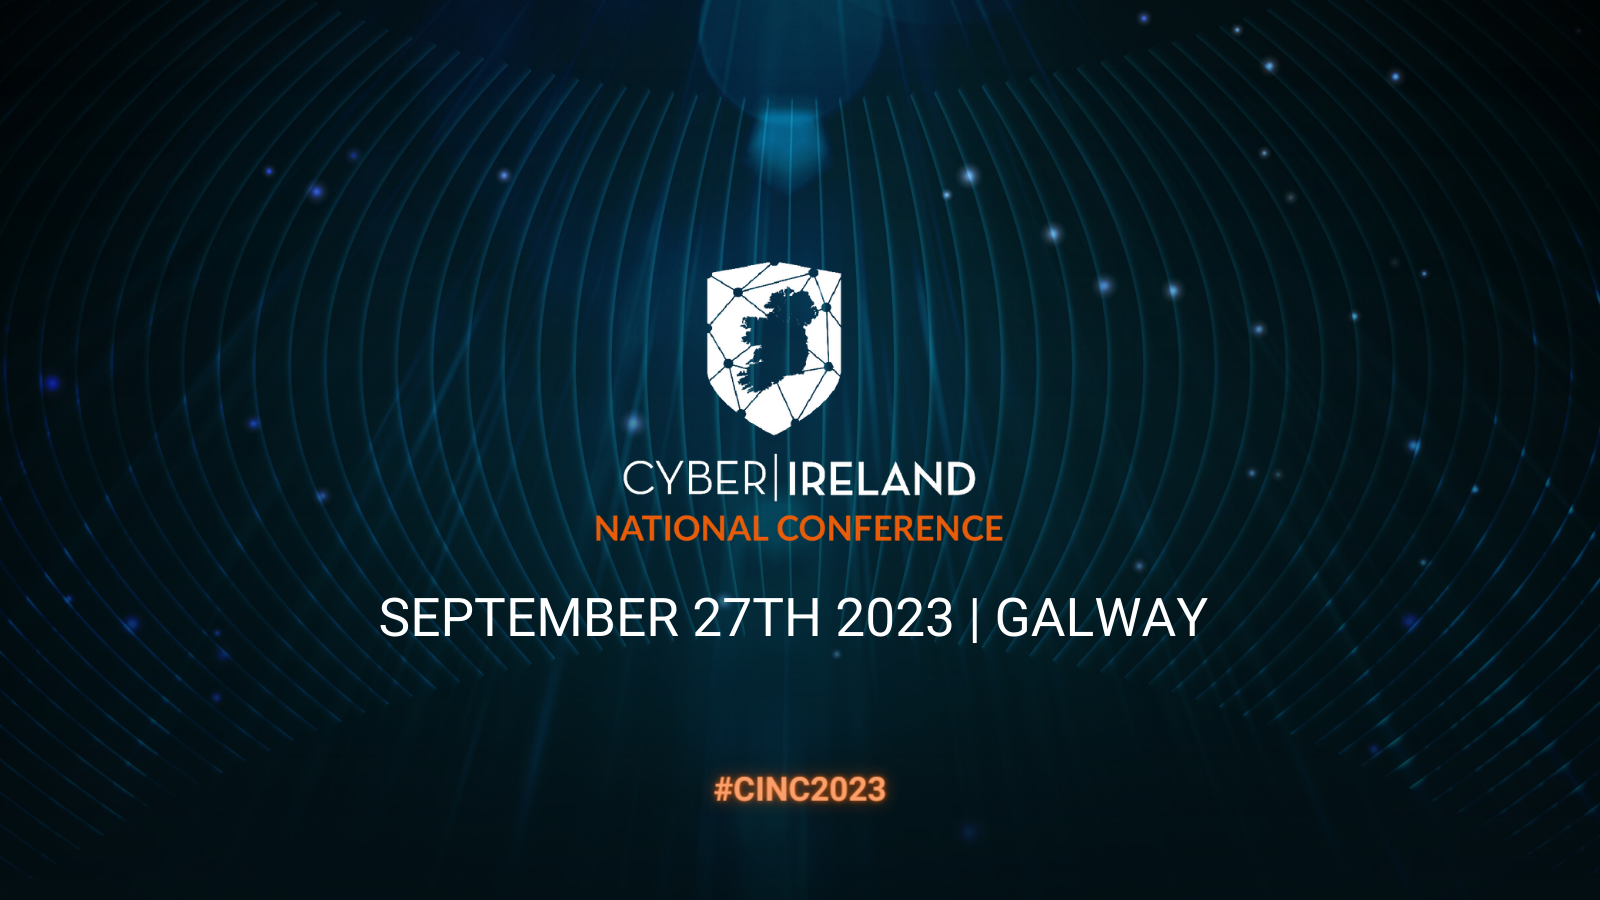 Cyber Ireland National Conference 2023